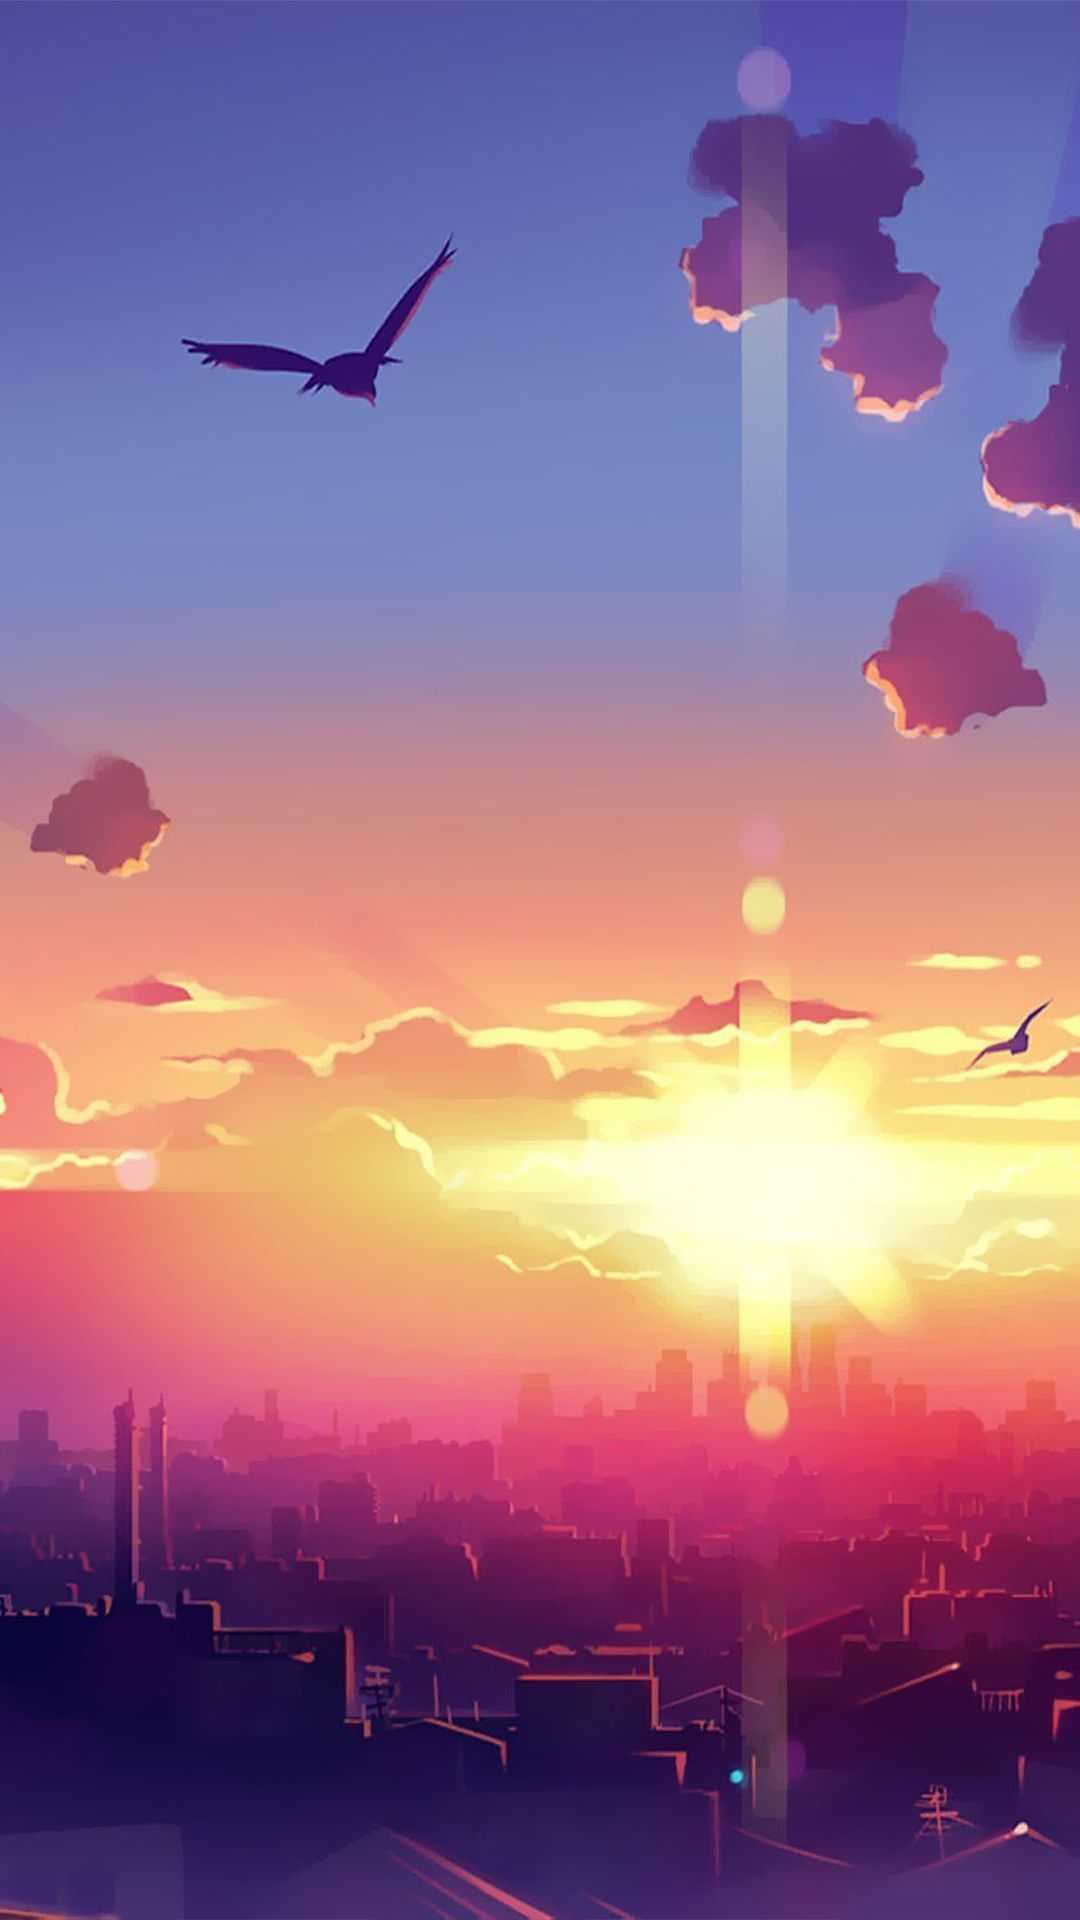 The sunset over a city with birds flying in it - Lo fi, anime city